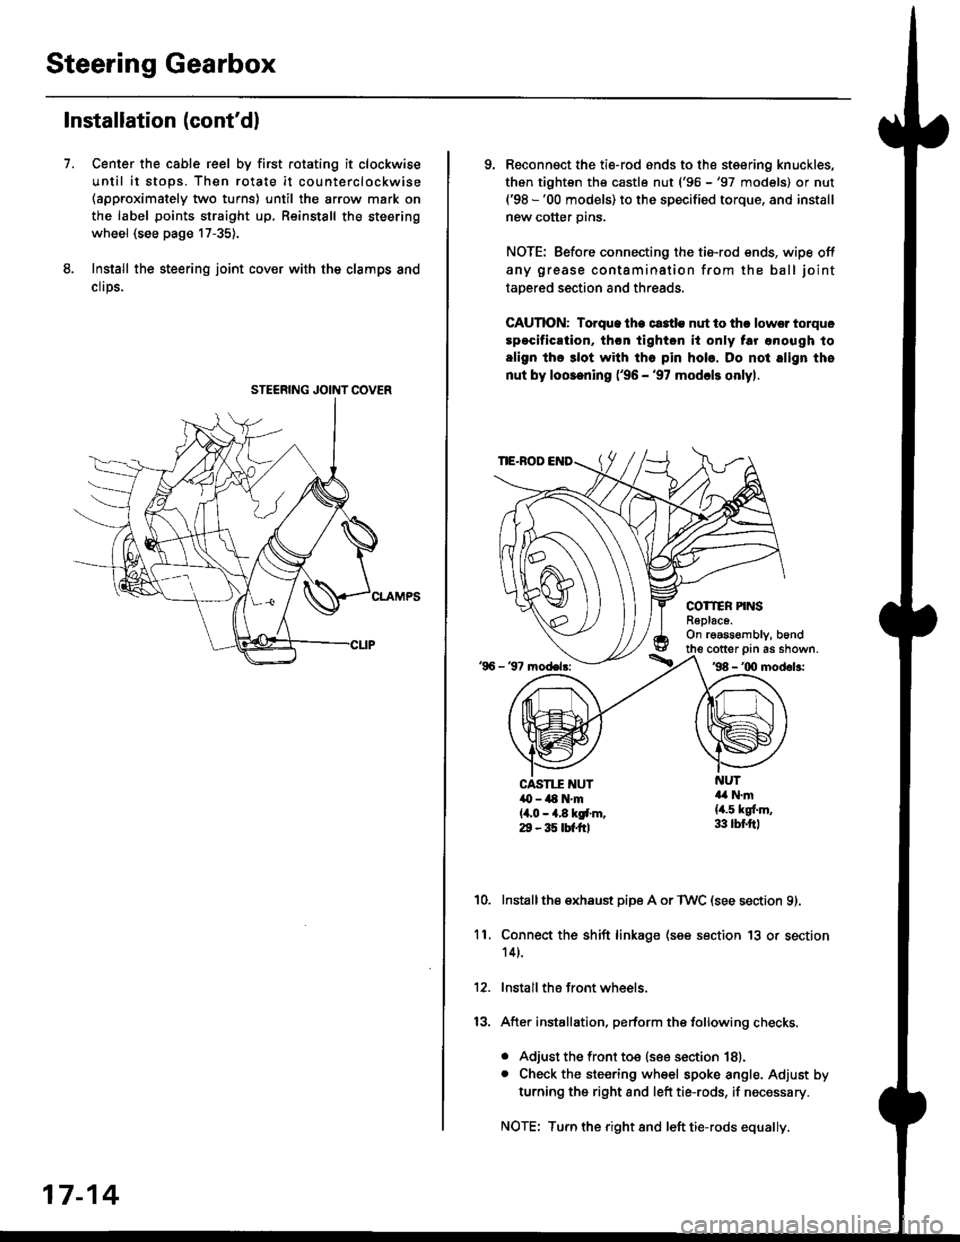 HONDA CIVIC 1996 6.G Owners Manual Steering Gearbox
Installation (contdl
Center the cable reel by first rotating it clockwise
until it stops. Then rotate it counterclockwise(approximately two turns) until the arrow mark on
the label p